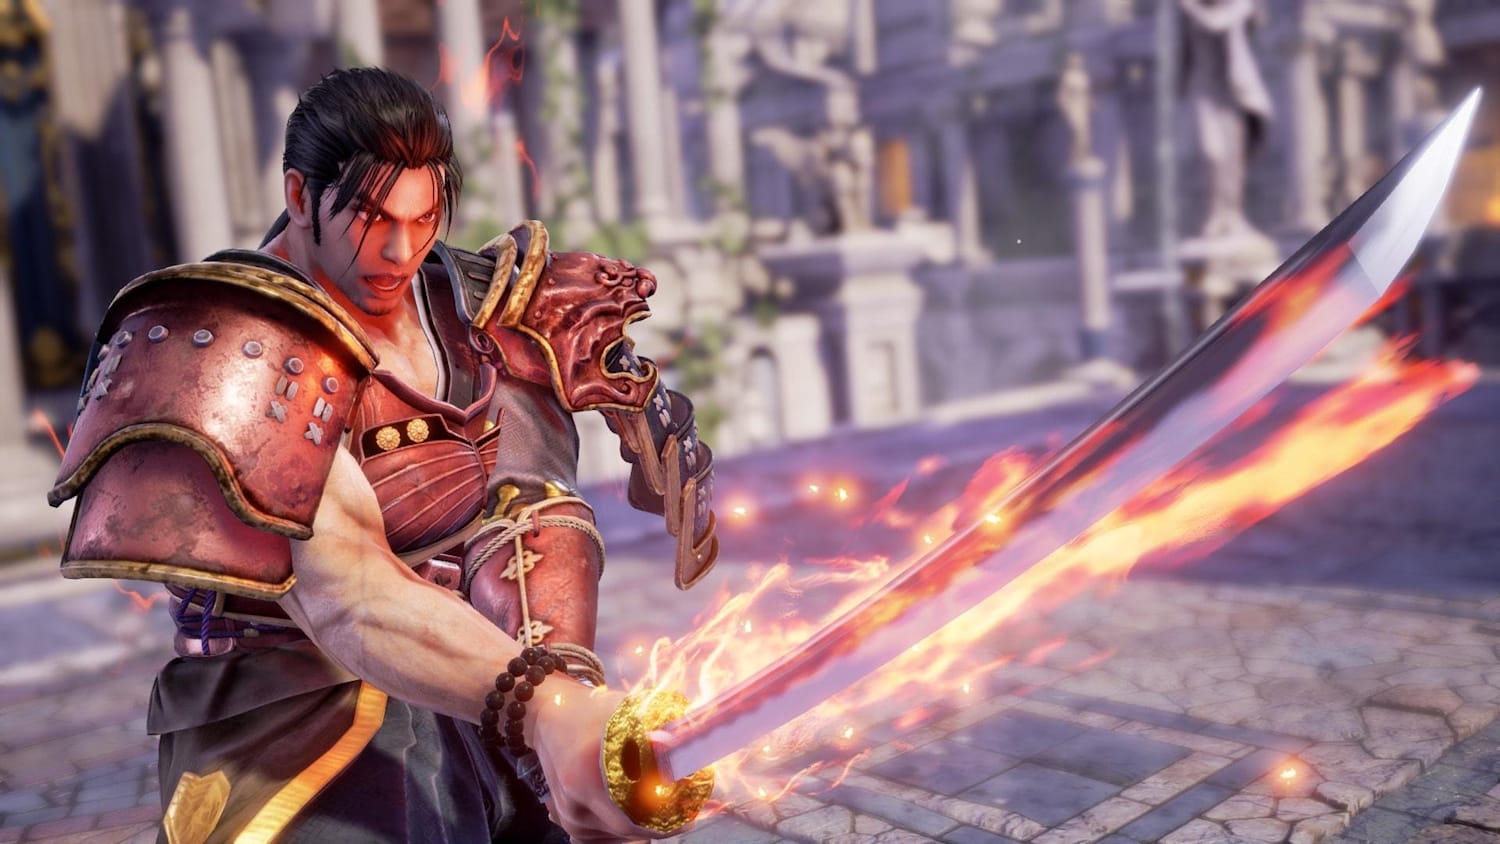 Soulcalibur VI new game: Our character wishlist